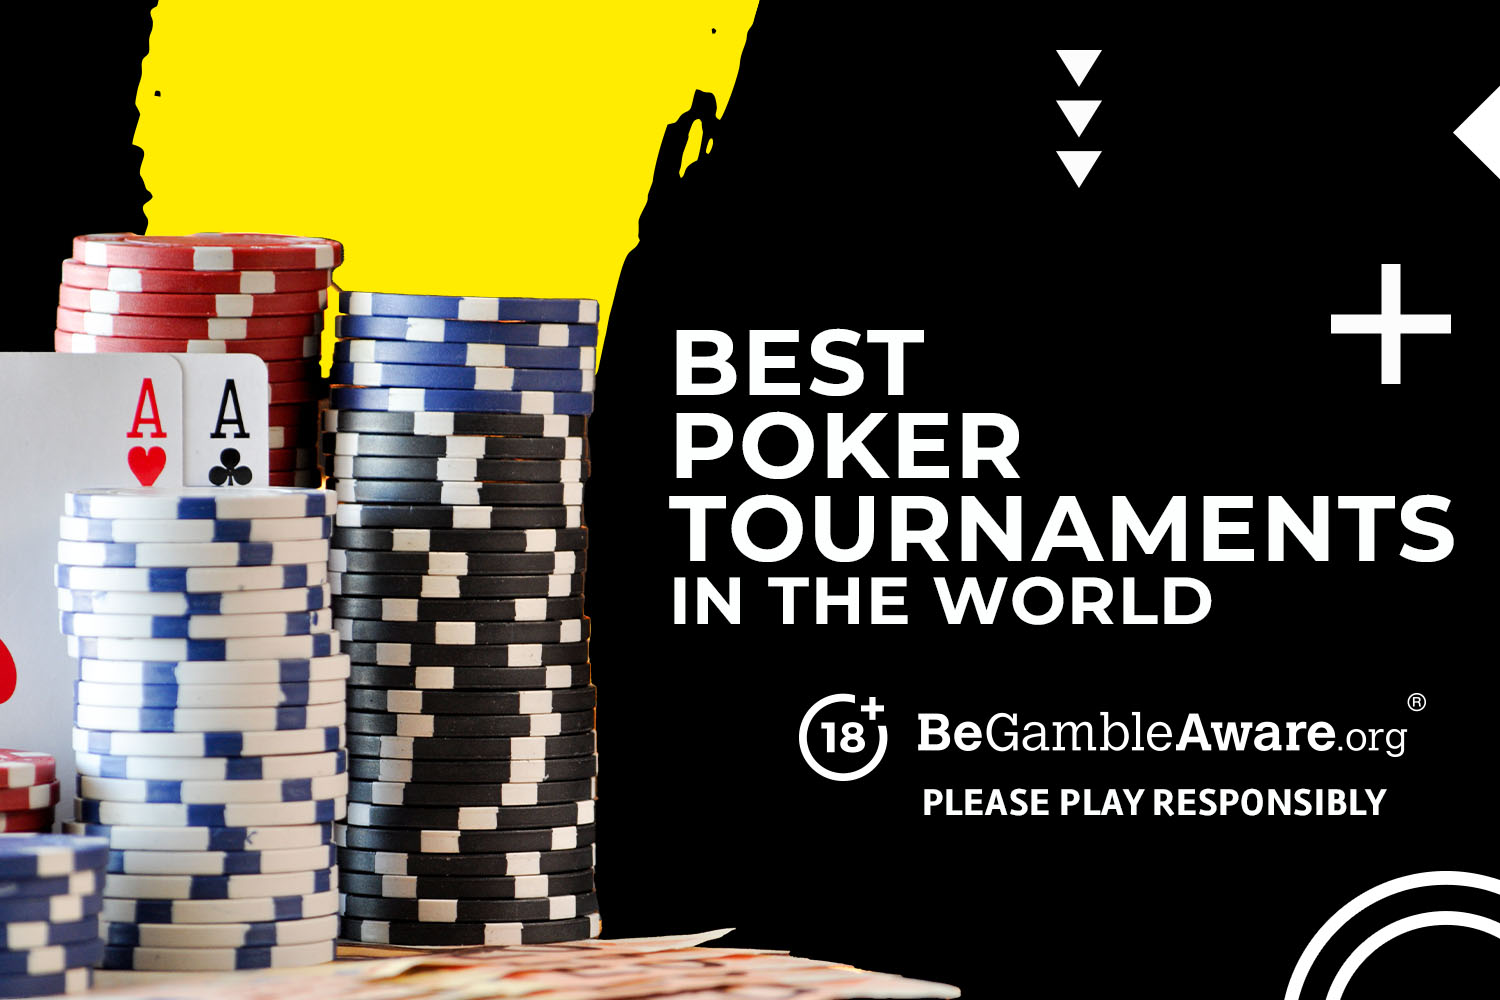 Best poker tournaments: Top 10 poker events in the world